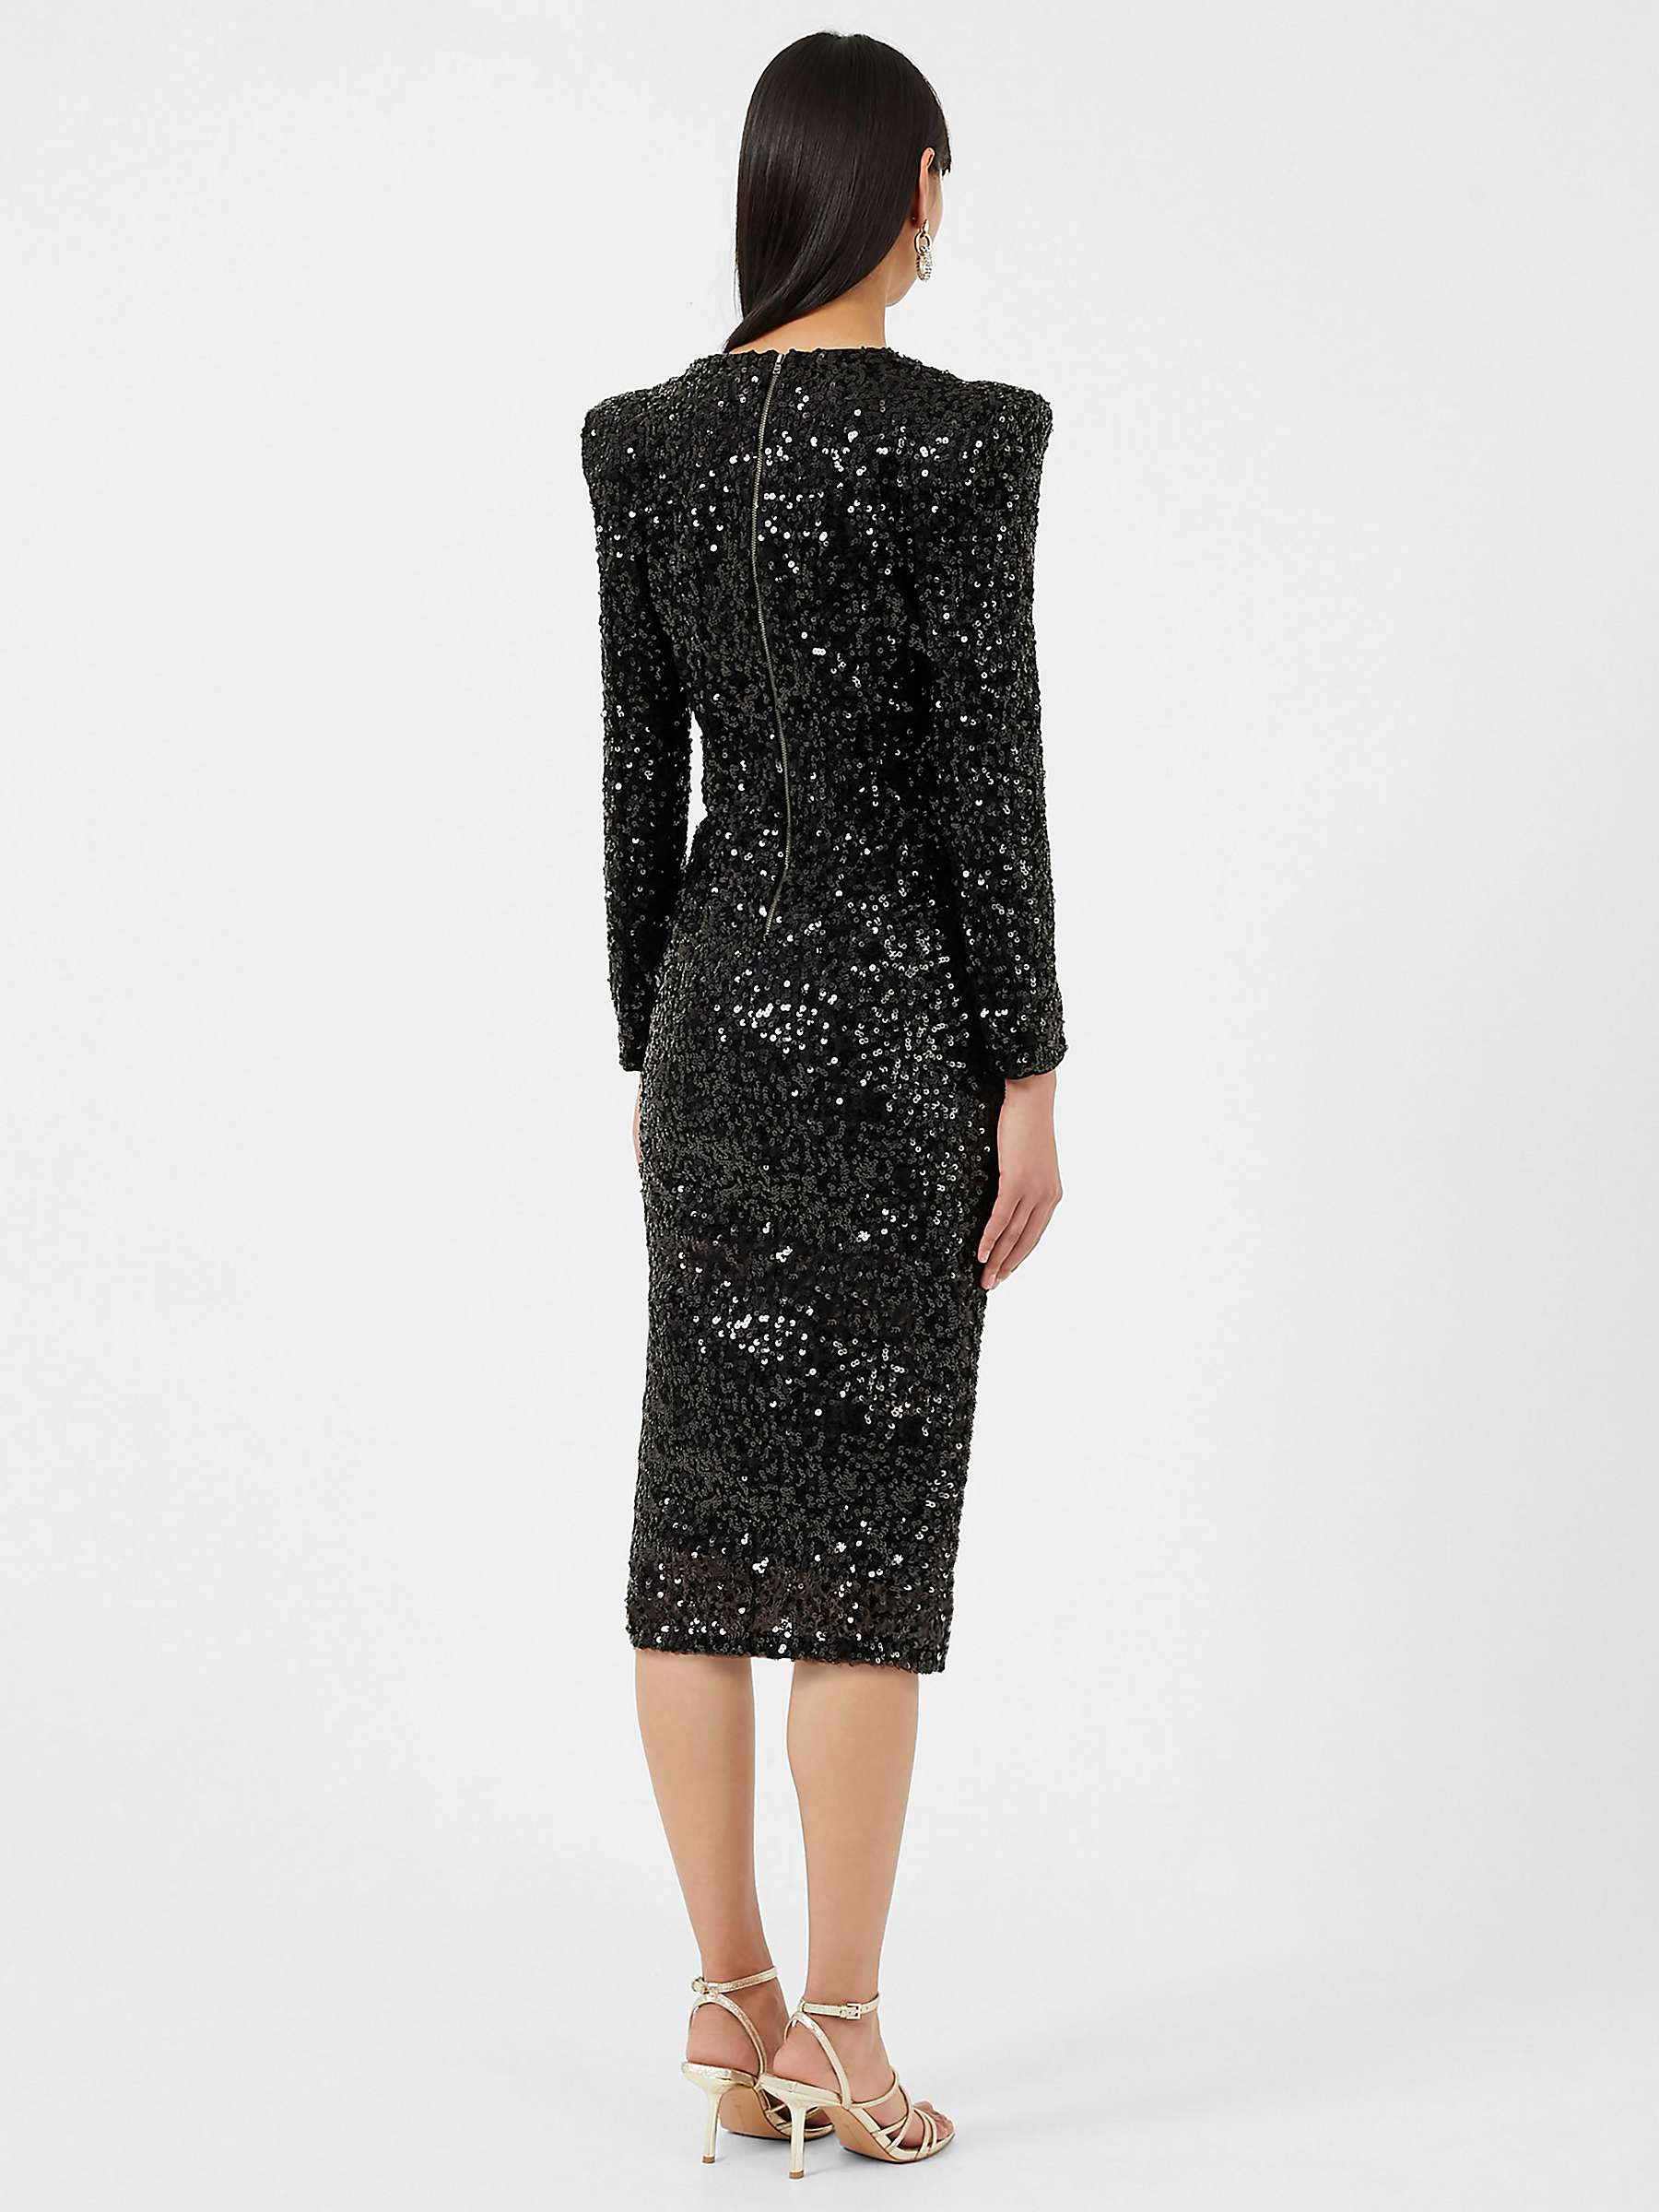 French Connection Samantha Sequin Dress, Black at John Lewis & Partners